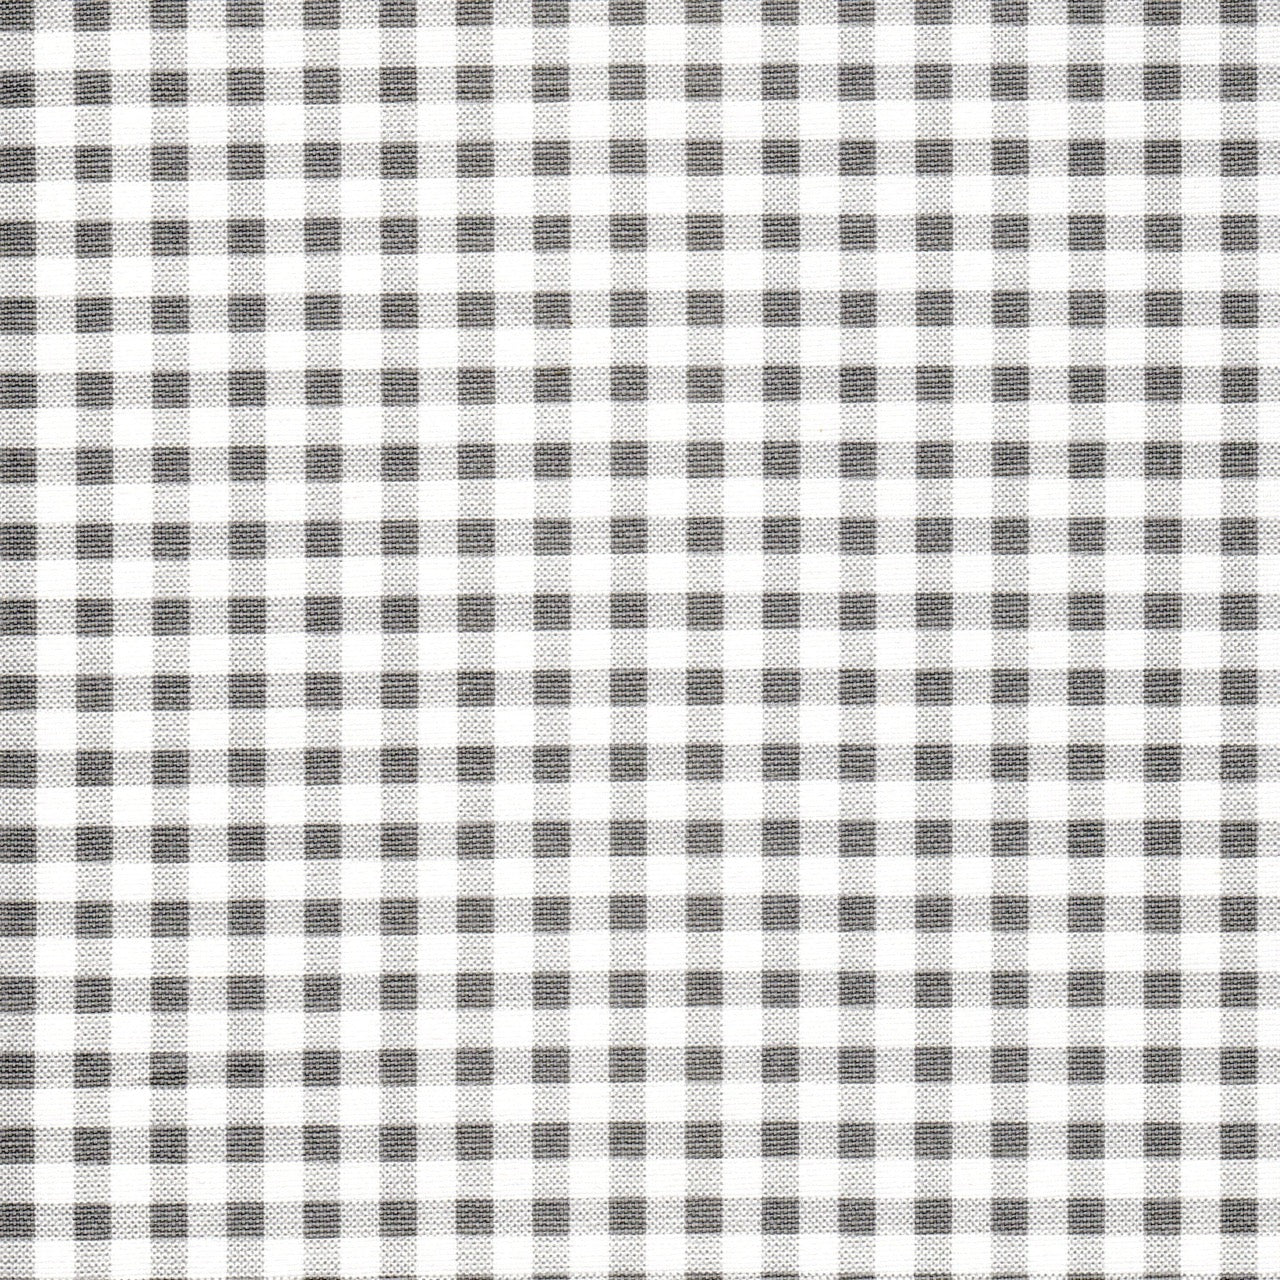 Bed Runner in Storm Gray Large Gingham Check on White